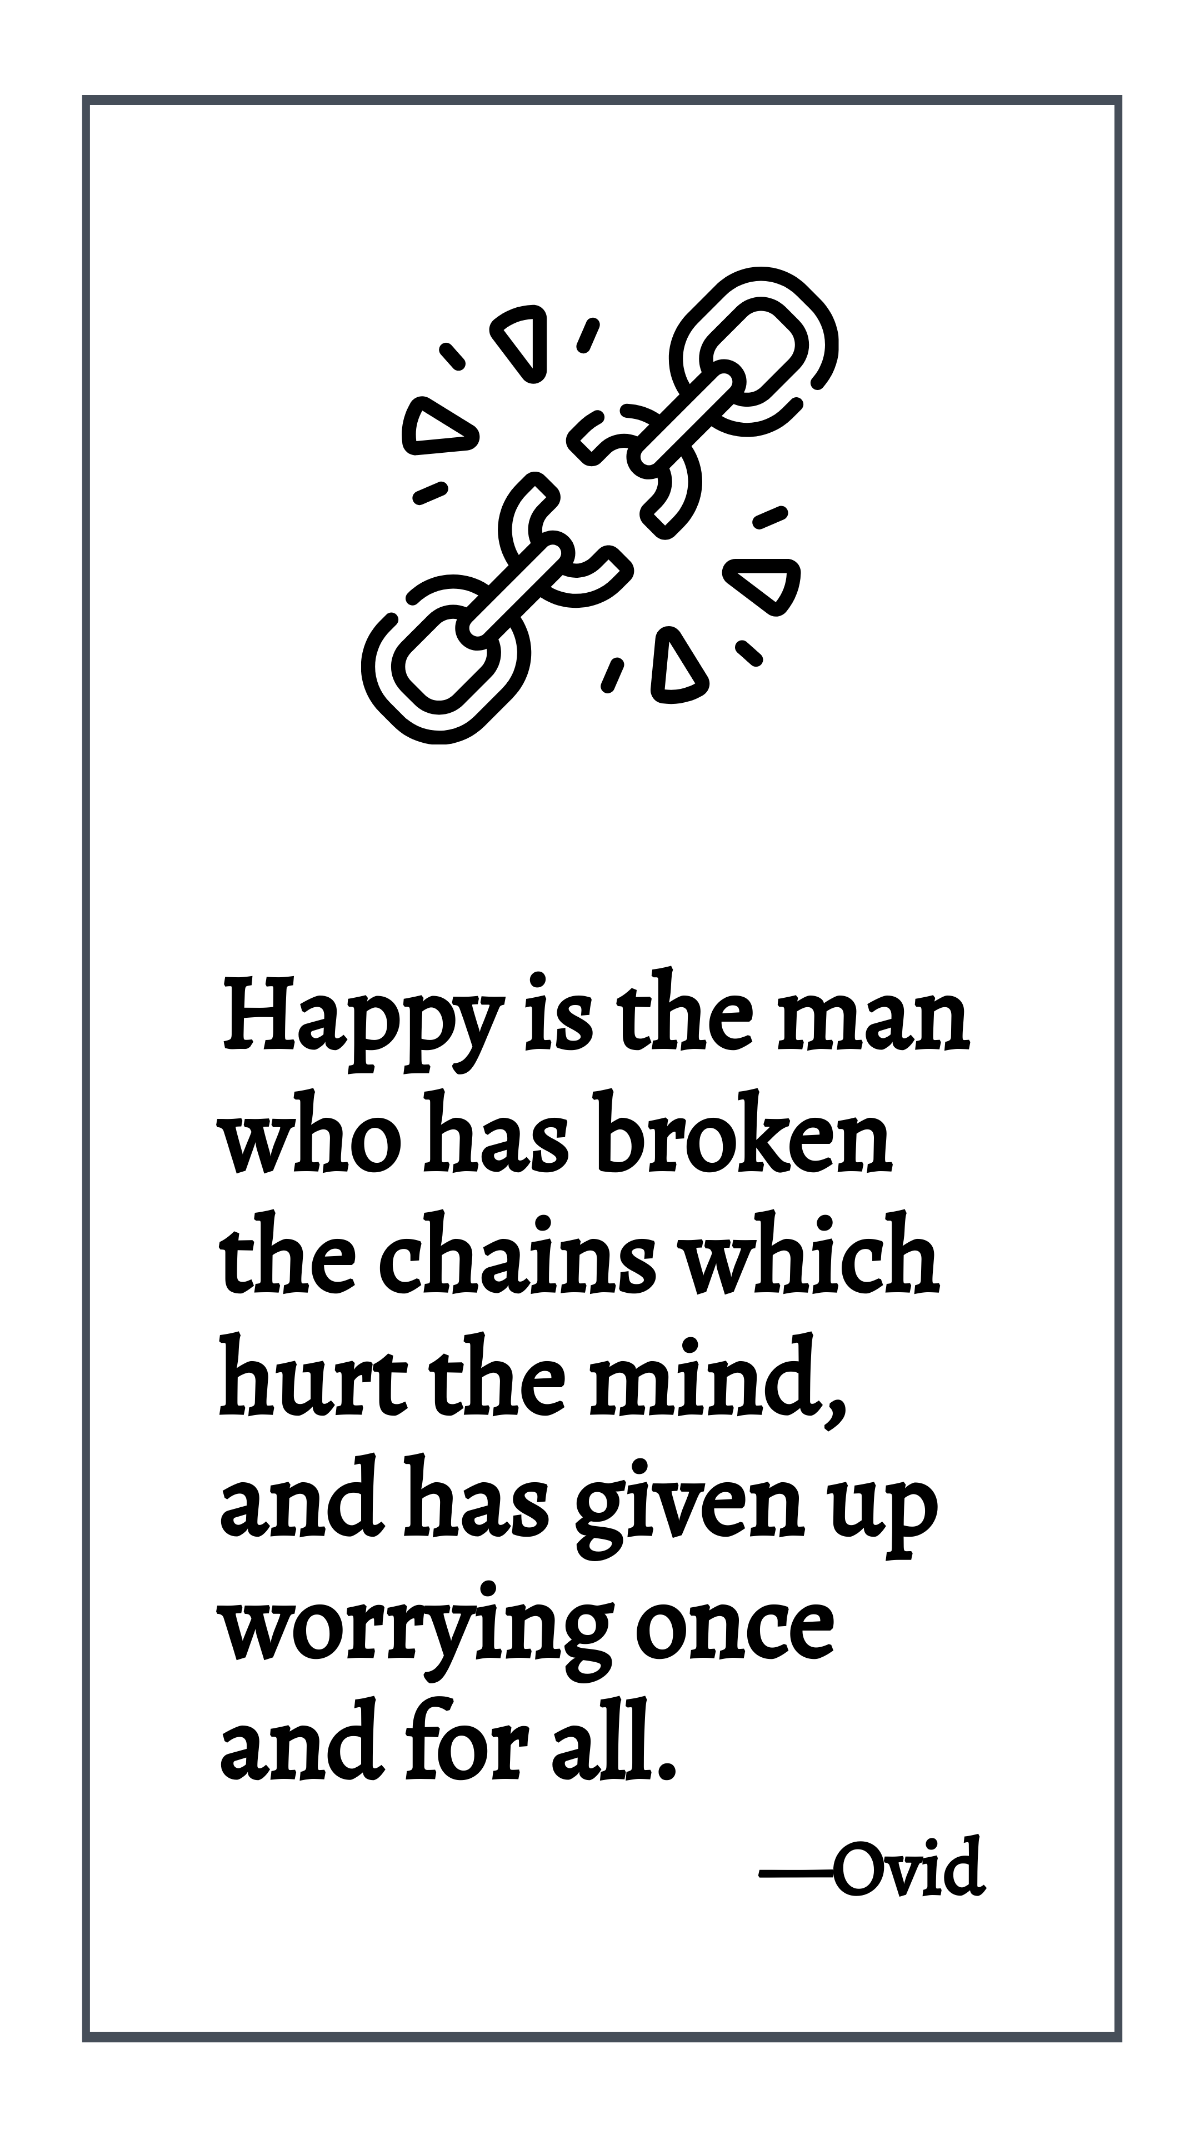 Ovid - Happy is the man who has broken the chains which hurt the mind, and has given up worrying once and for all. Template